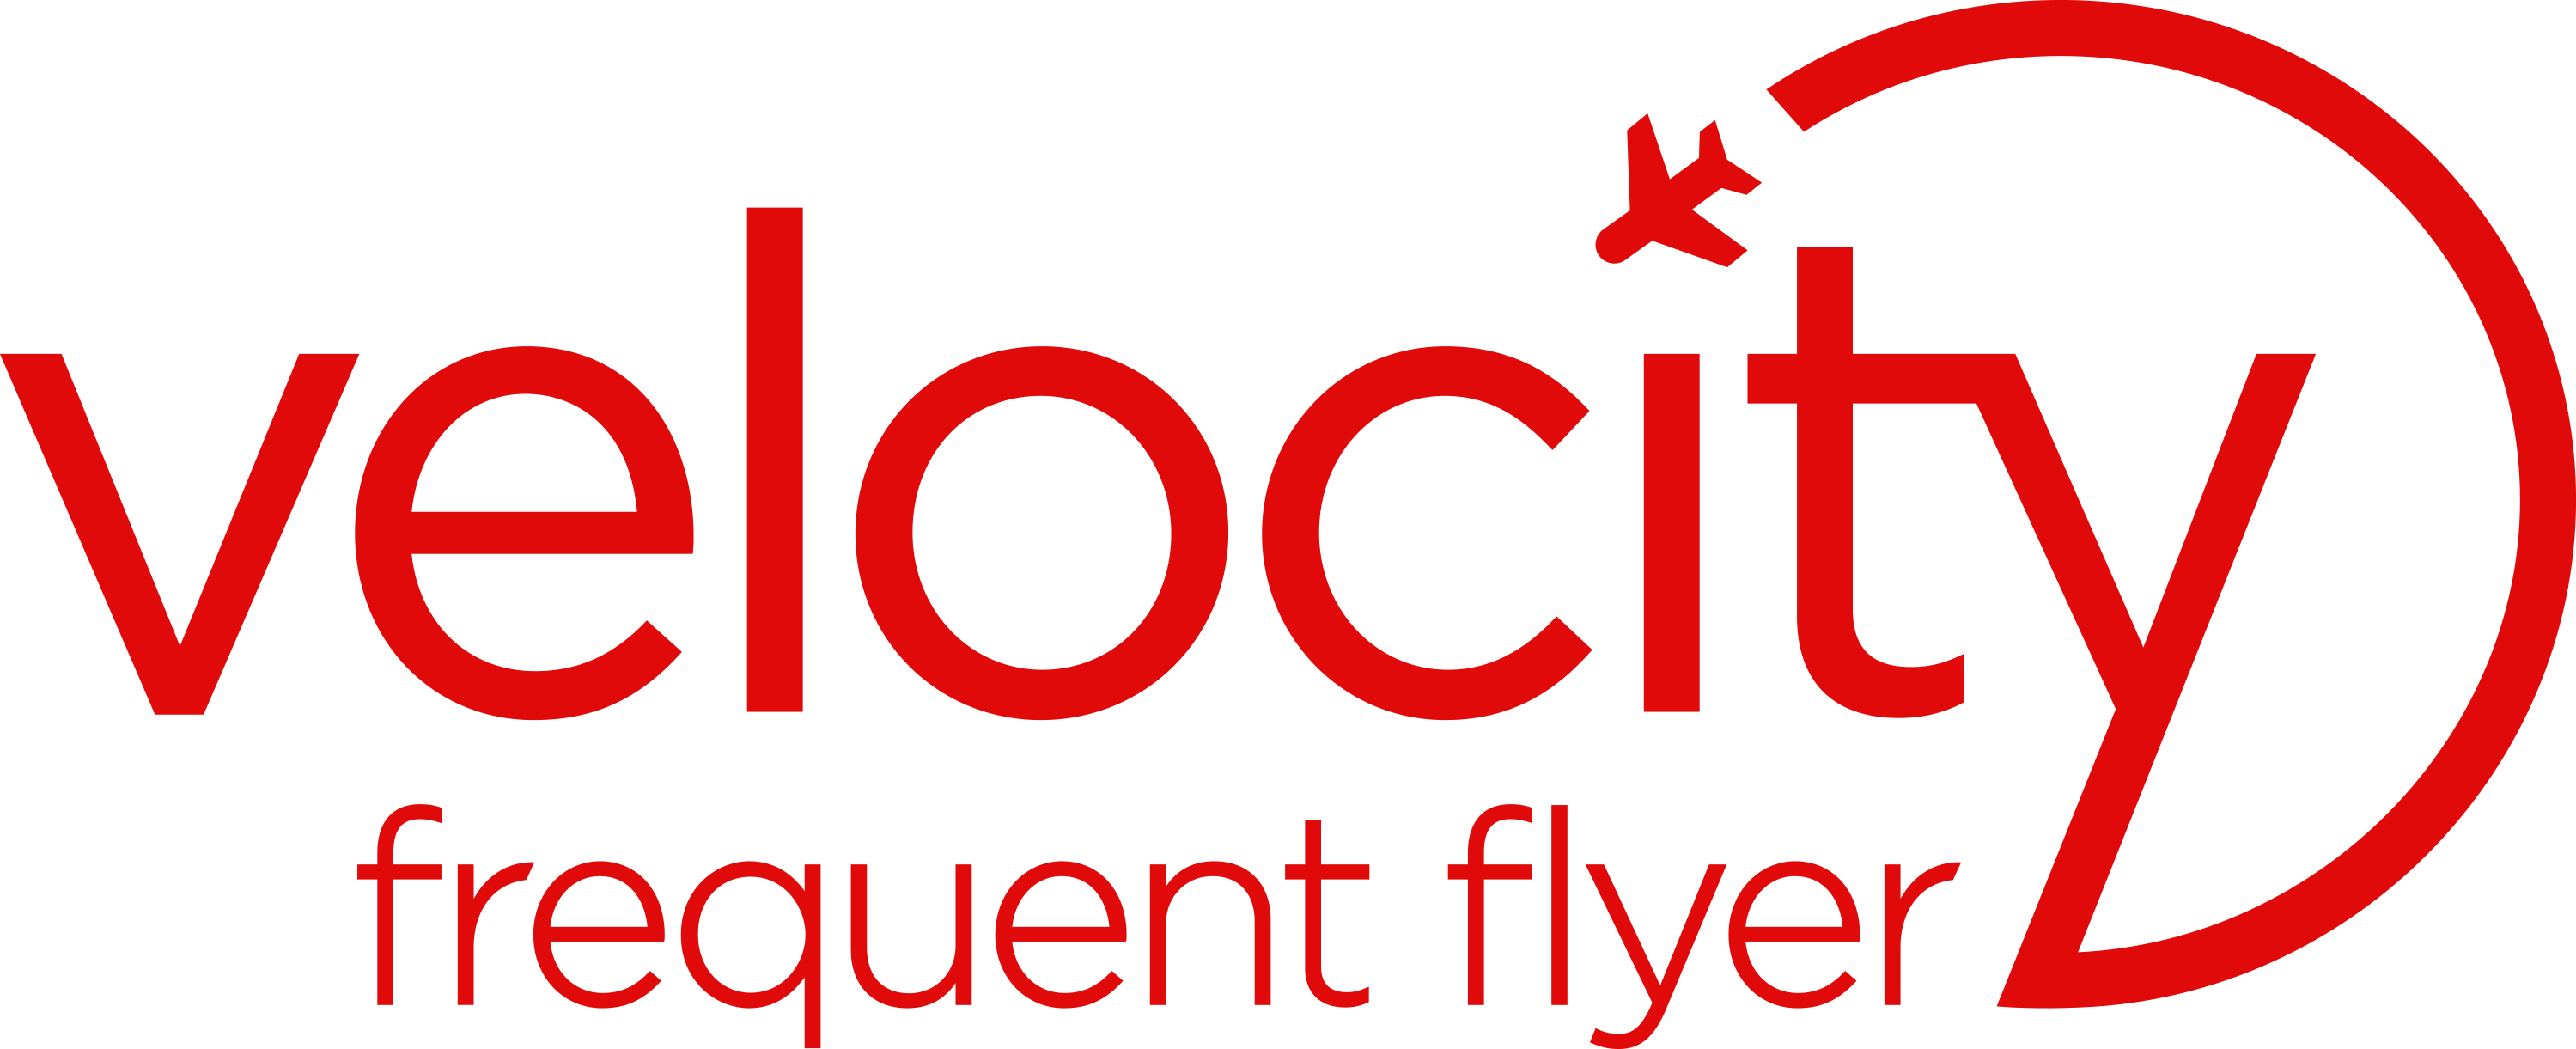 Velocity frequent flyer